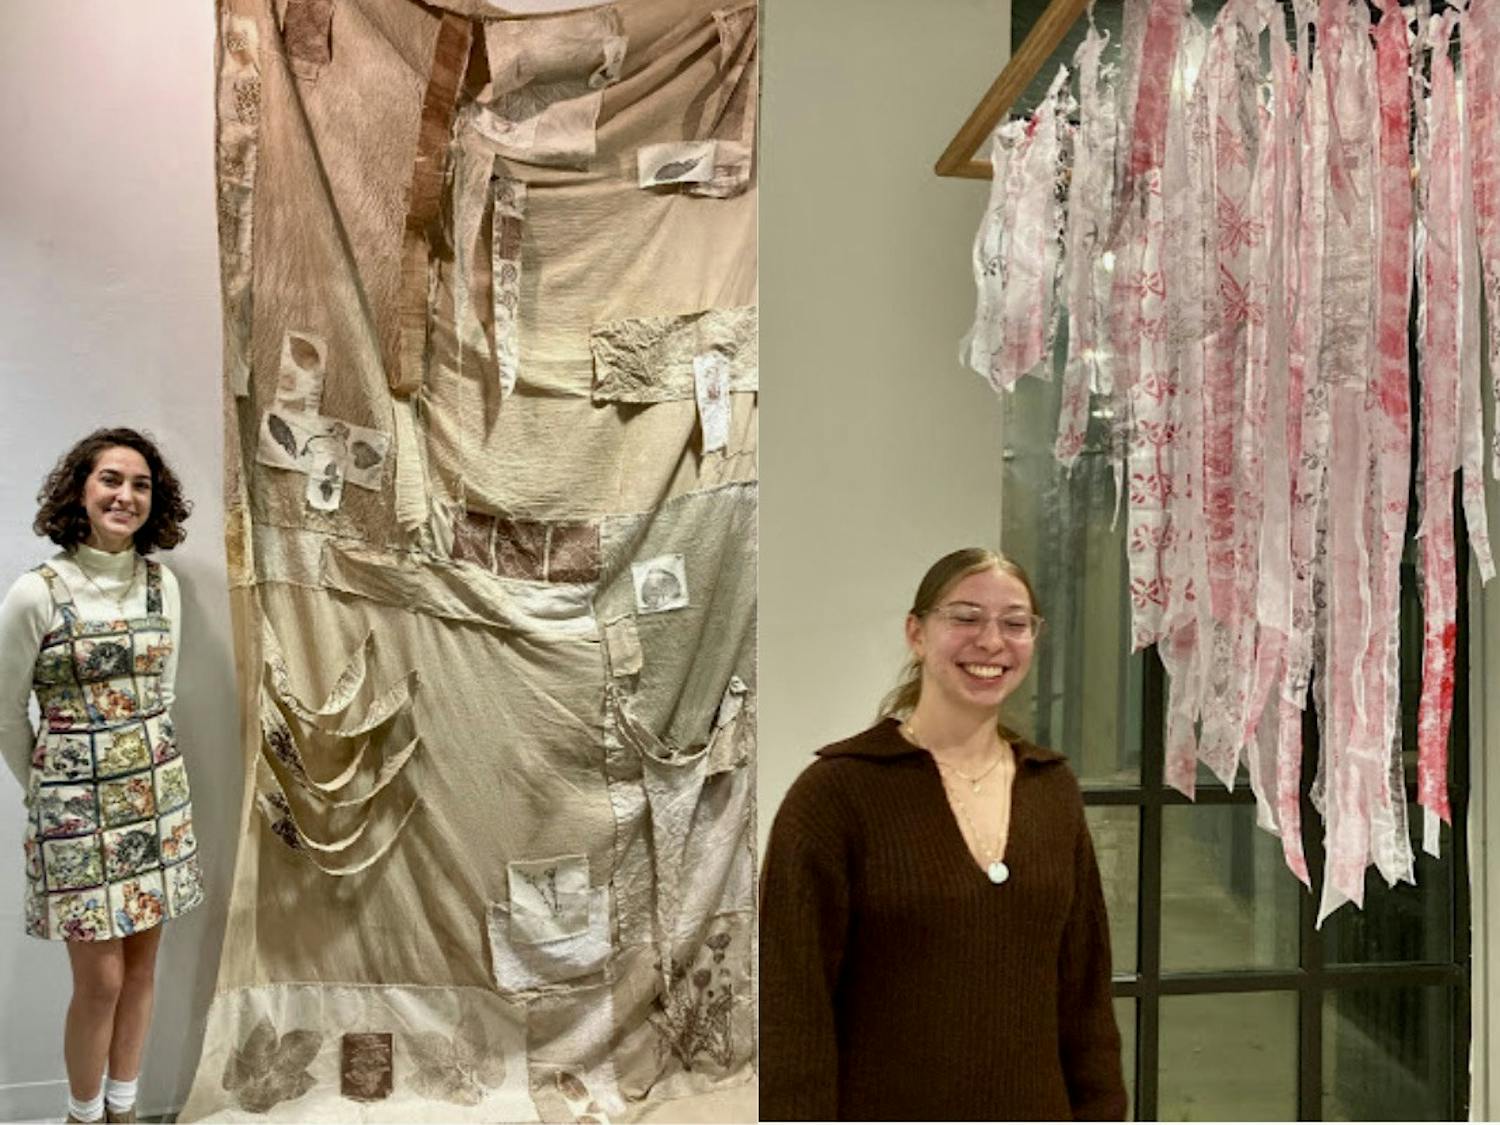 Micheala Moran with &quot;Impressions&quot; (left) and Angela Siwarski with &quot;Untitled&quot; (right) (Photos Courtesy of Lilly Ward).